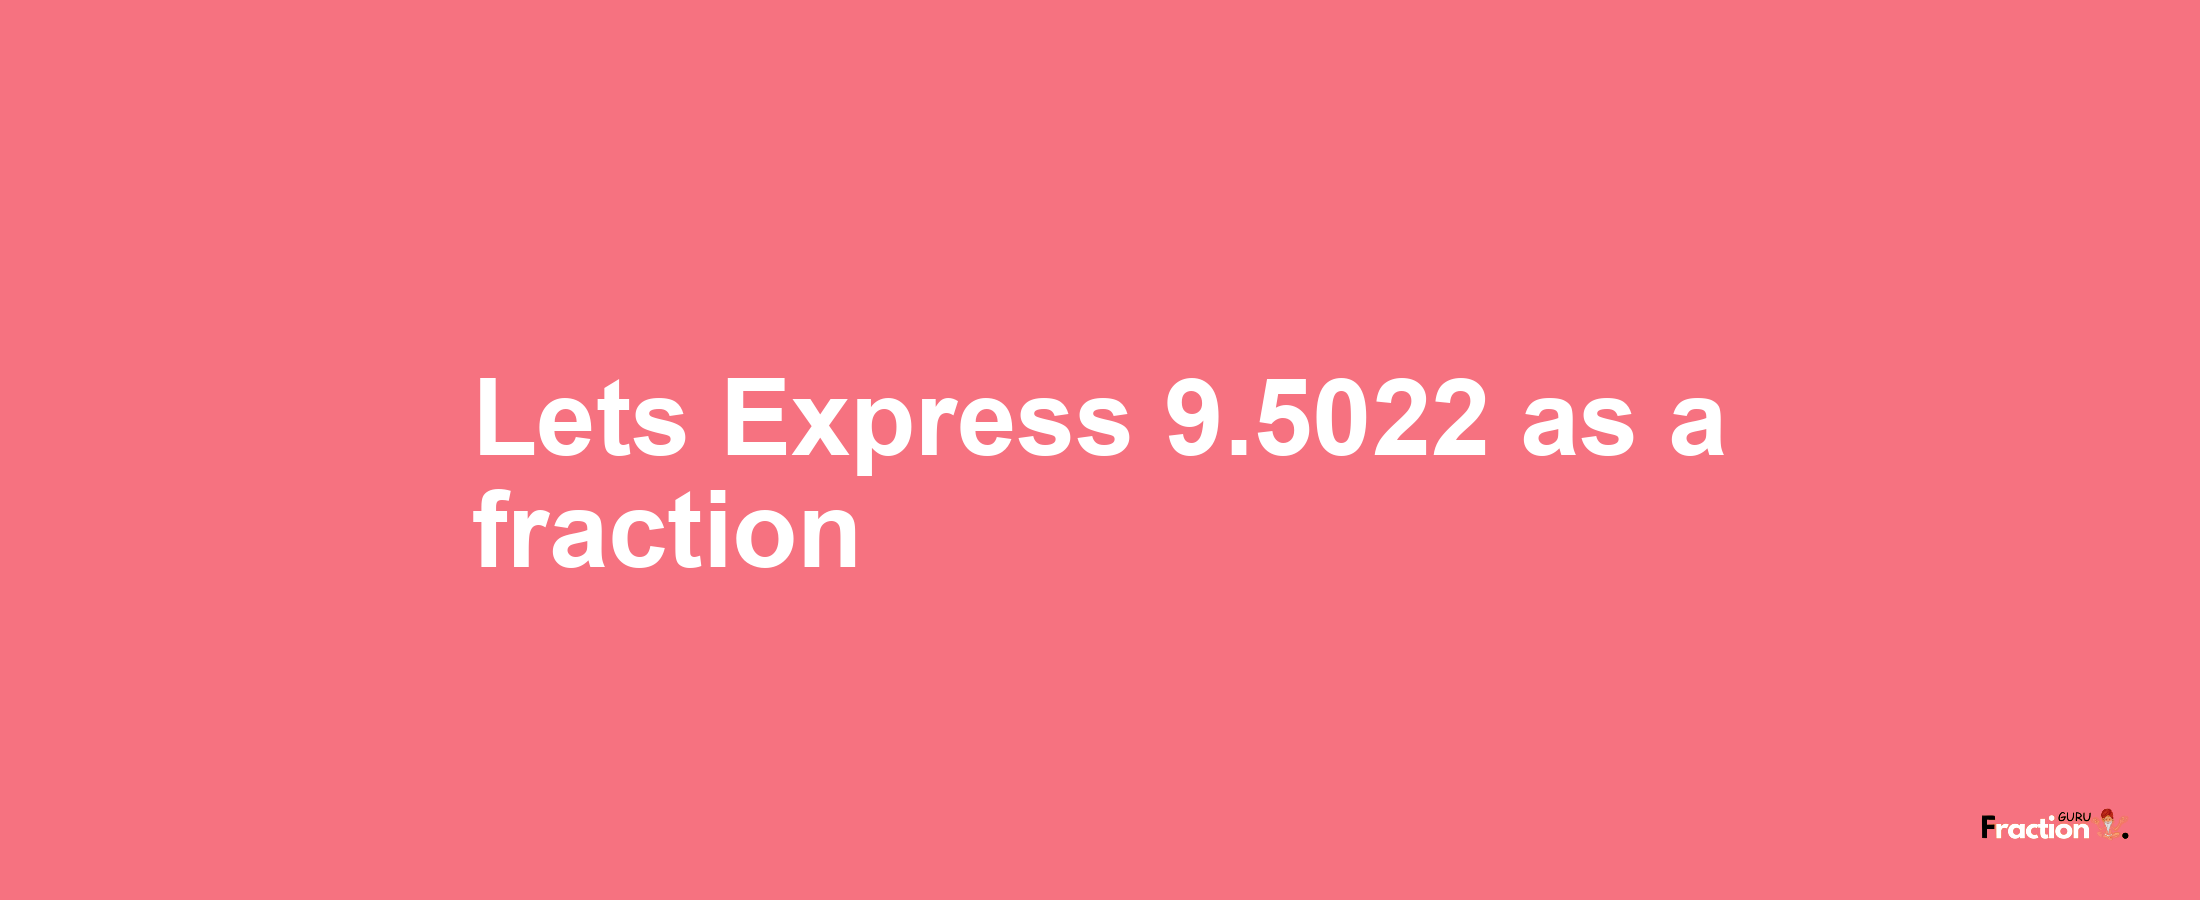 Lets Express 9.5022 as afraction